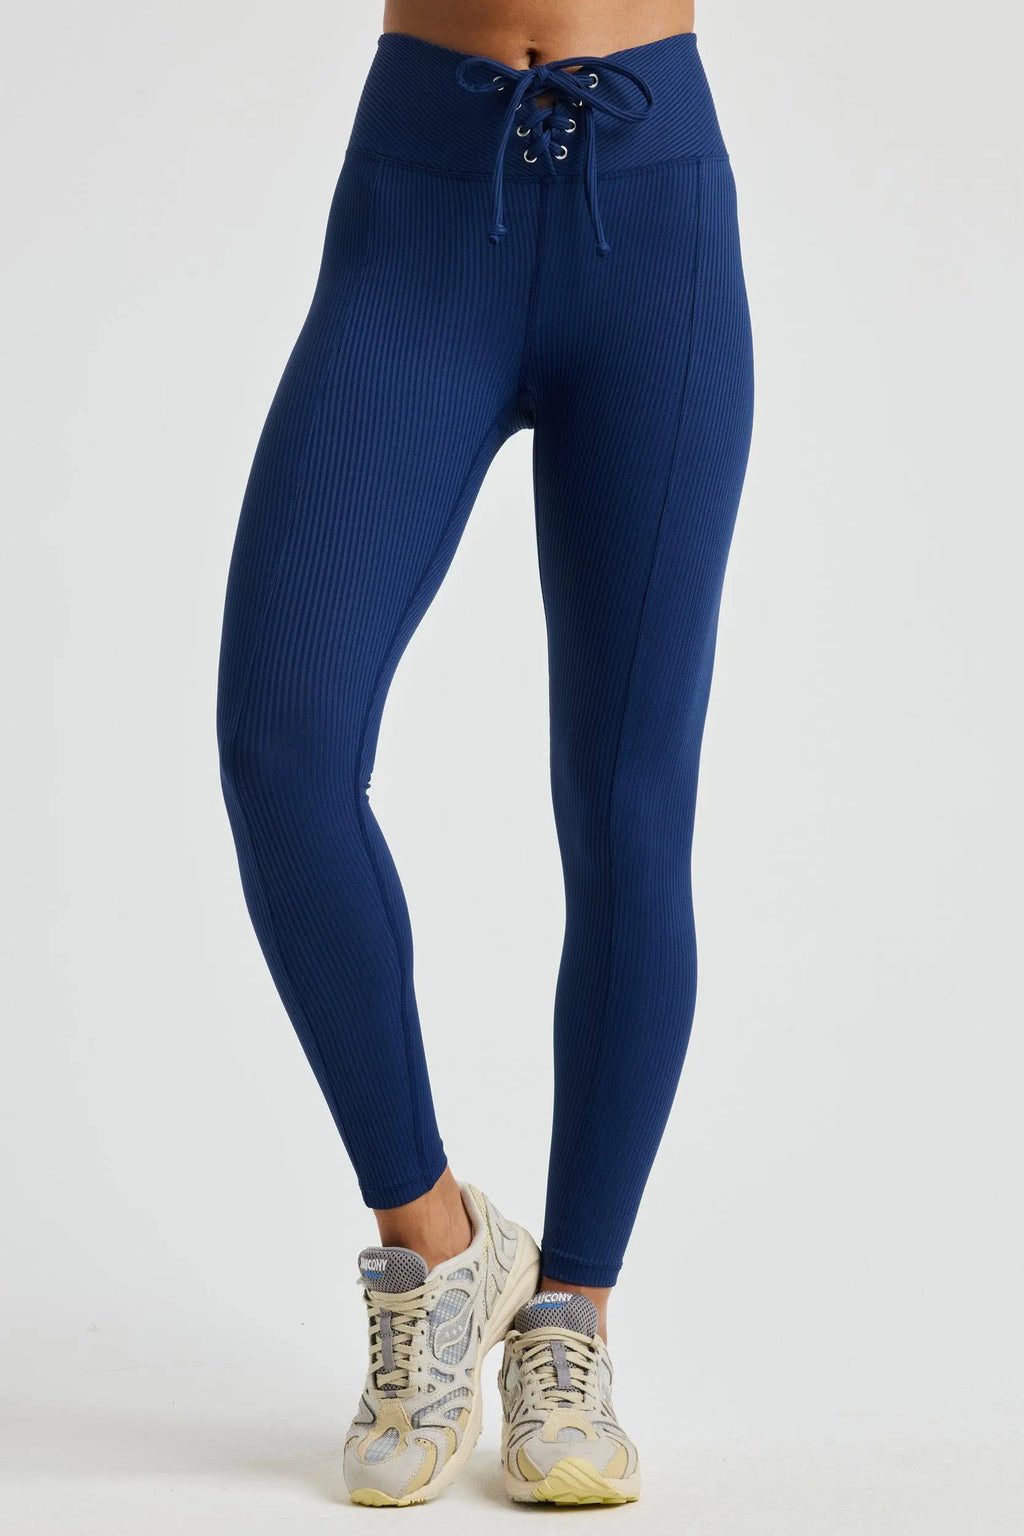 Ribbed Football Legging – Year of Ours